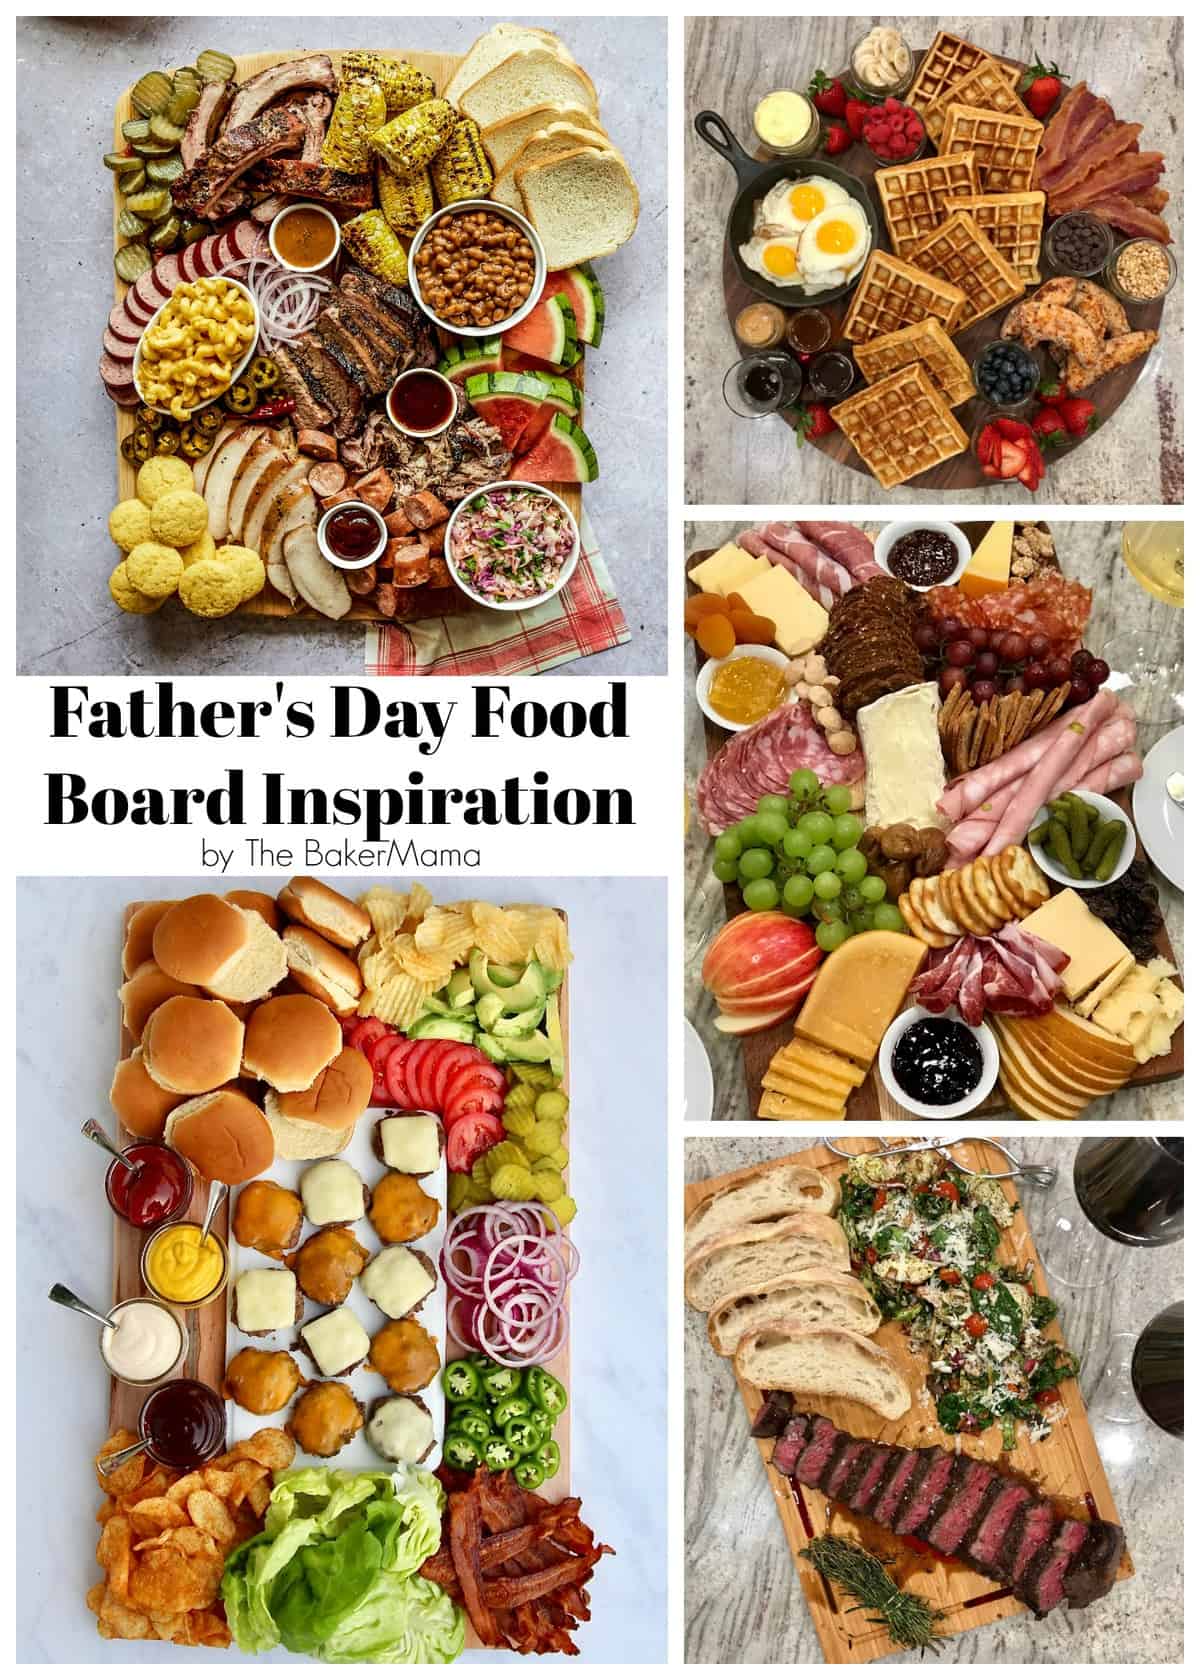 Father's Day Food Board Inspiration by The BakerMama